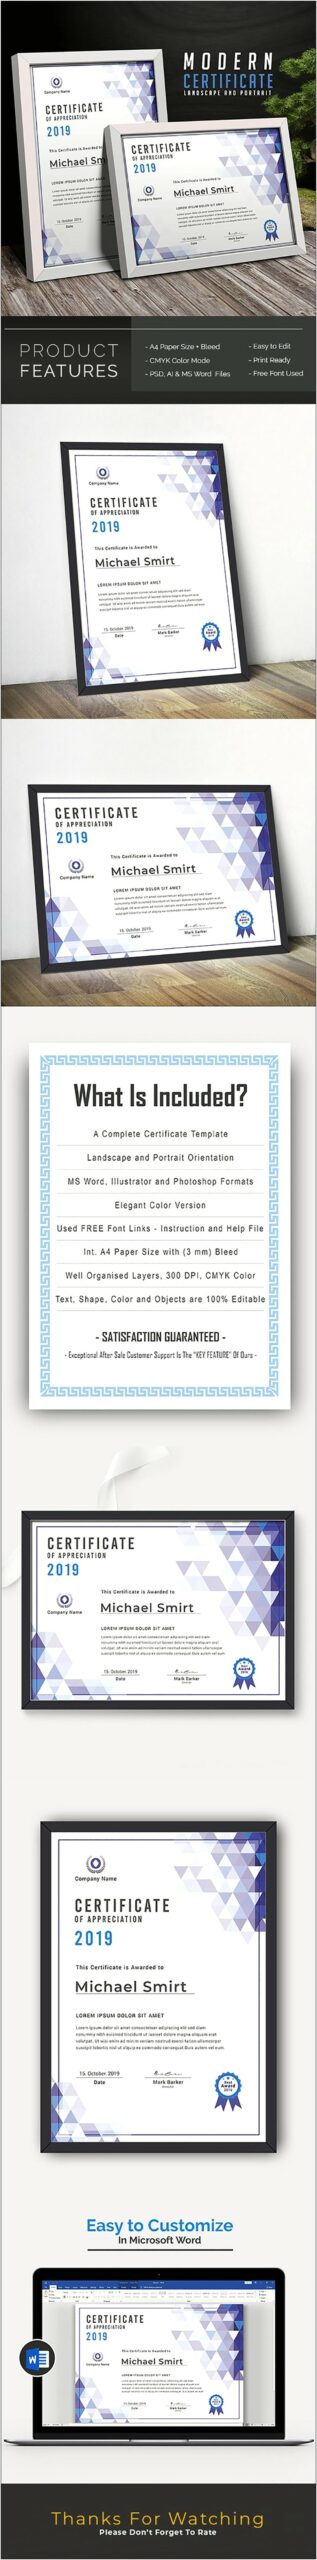 Does Microsoft Word Have A Certificate Template